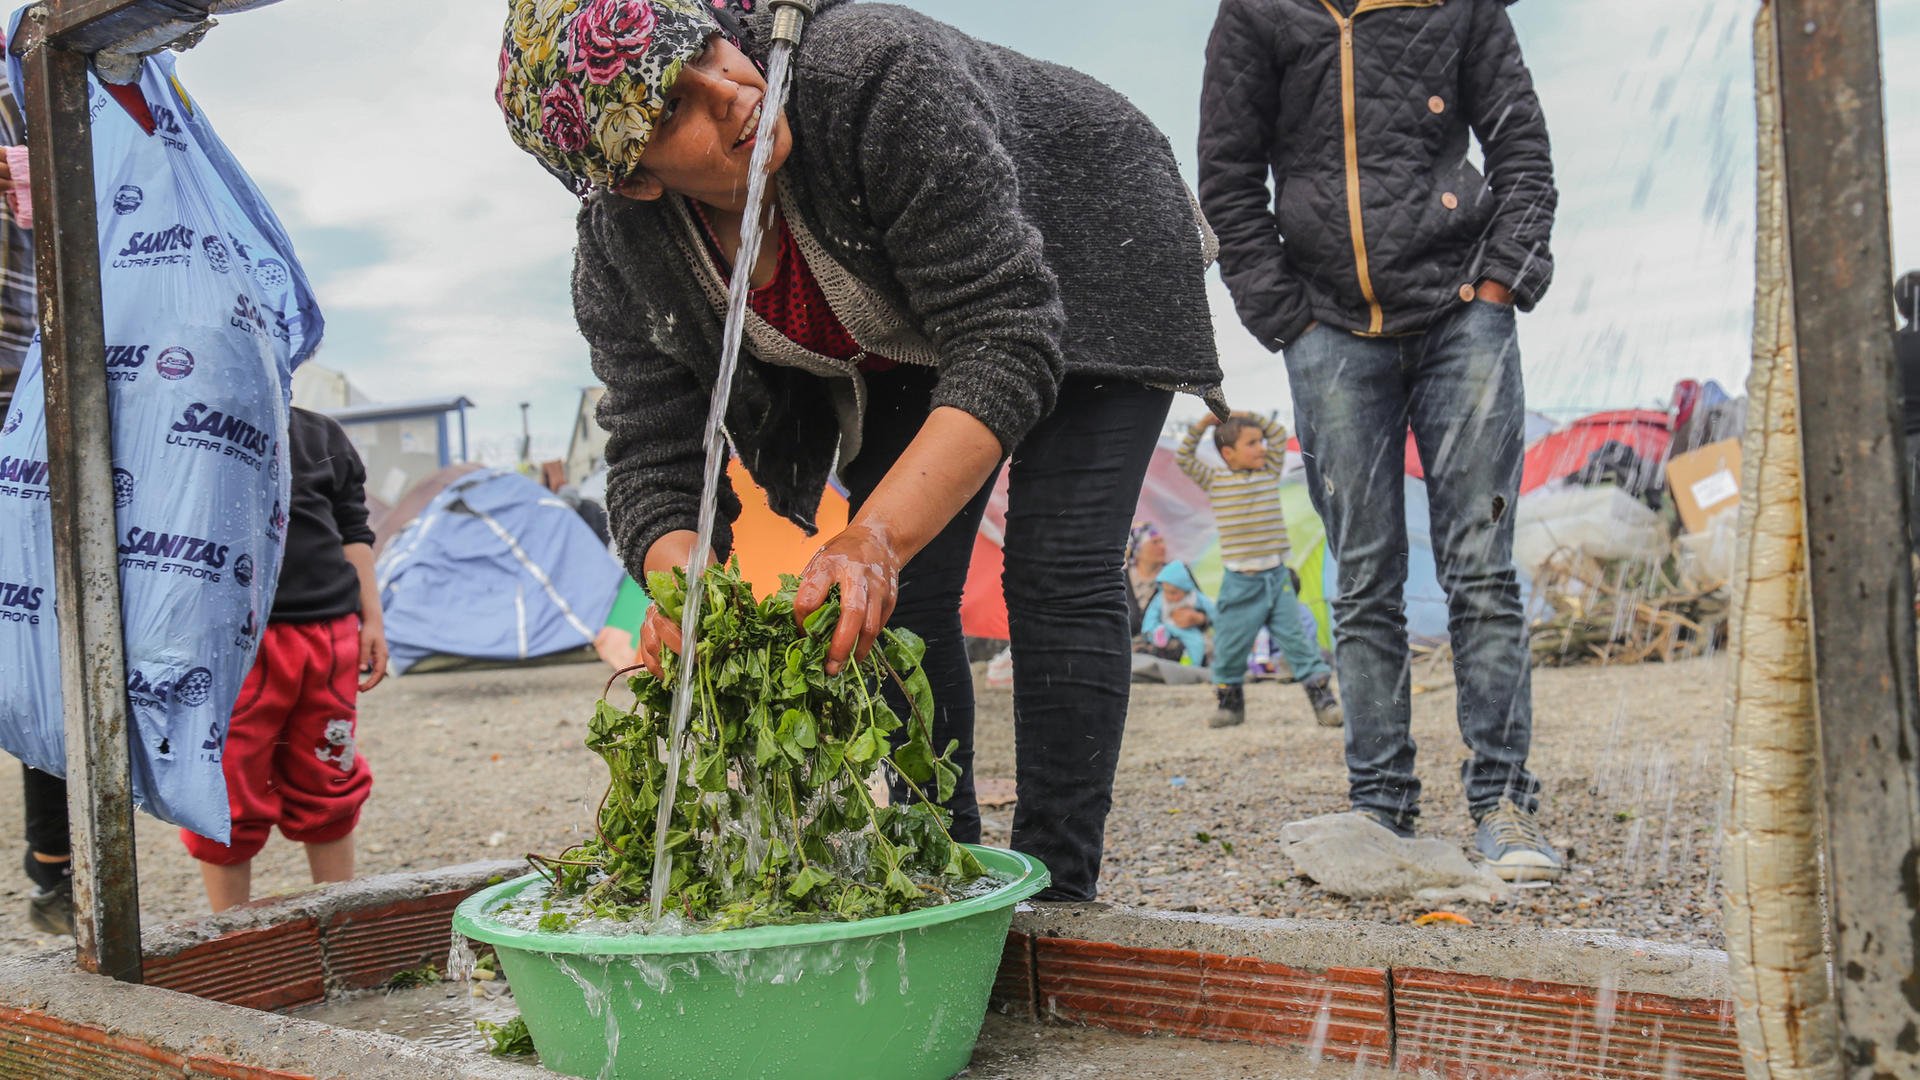 A woman washes vegatables at an IRC-installed water tap in Idomeni, Greece